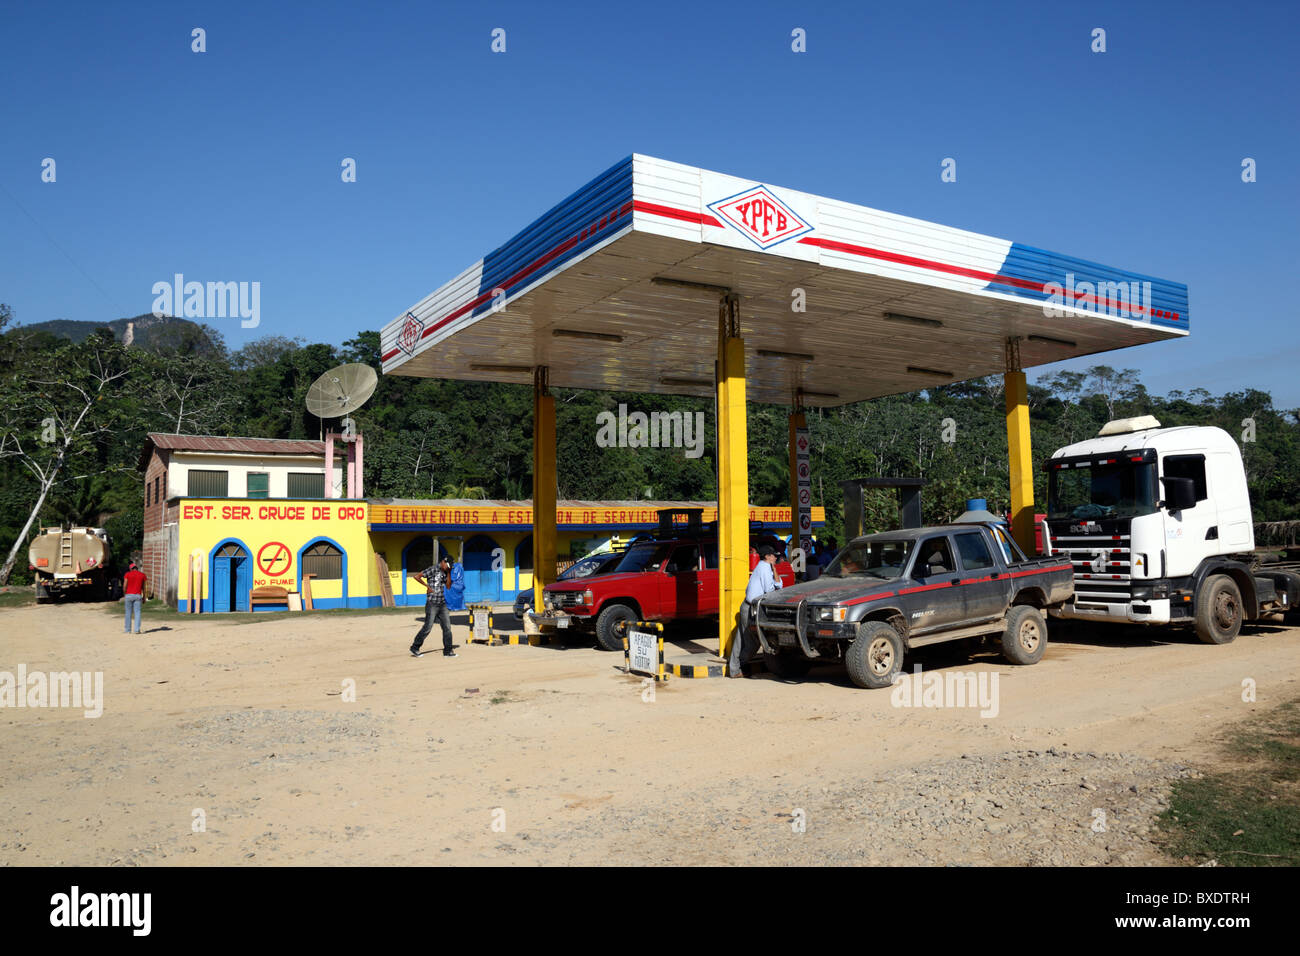 YPFB petrol station and tropical forest near Rurrenabaque, Beni Department,  Bolivia Stock Photo